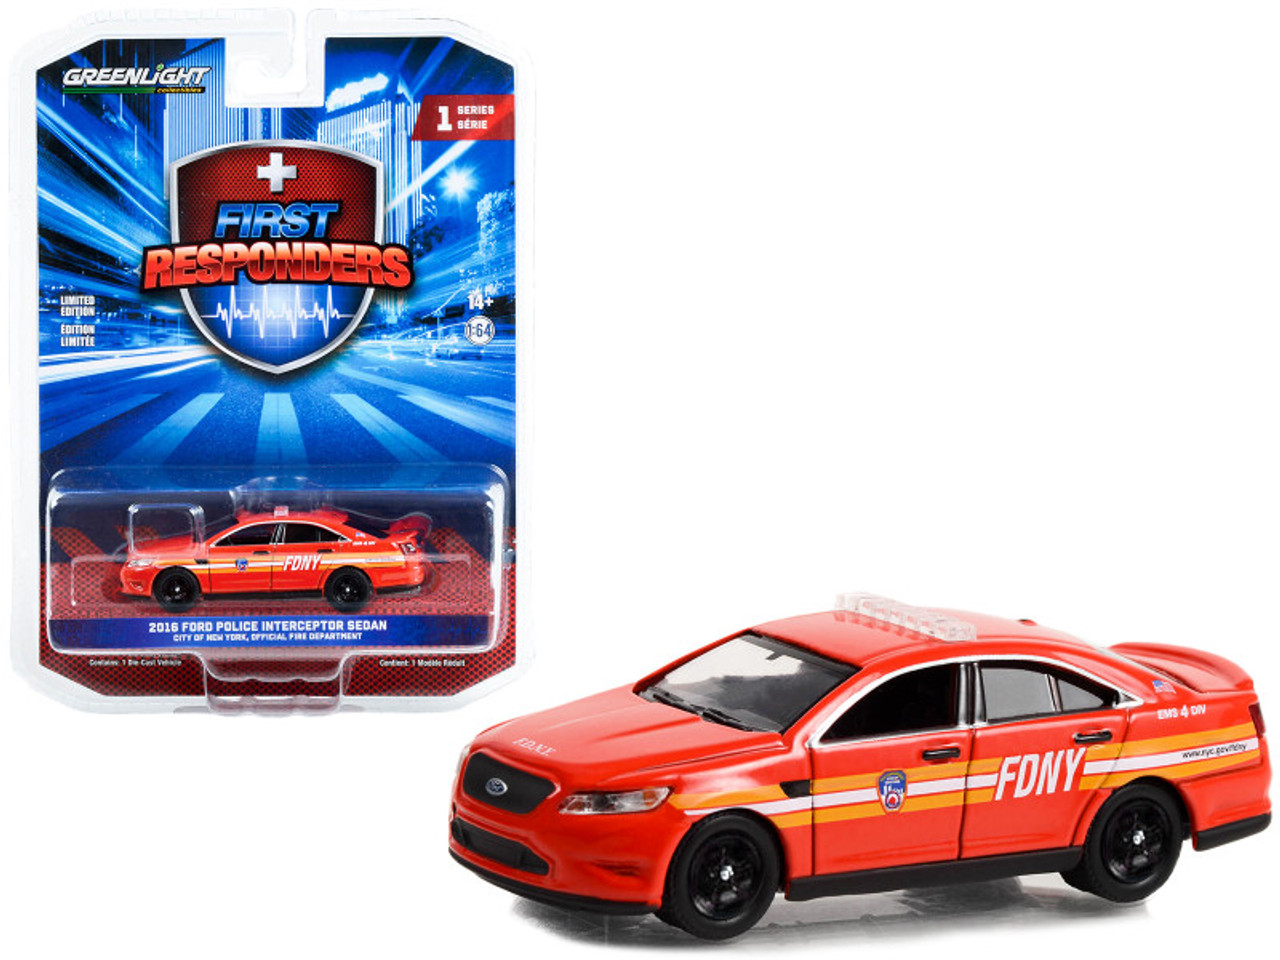 2016 Ford Police Interceptor Sedan Red "FDNY (The Official Fire Department City of New York)" "First Responders" Series 1 1/64 Diecast Model Car by Greenlight